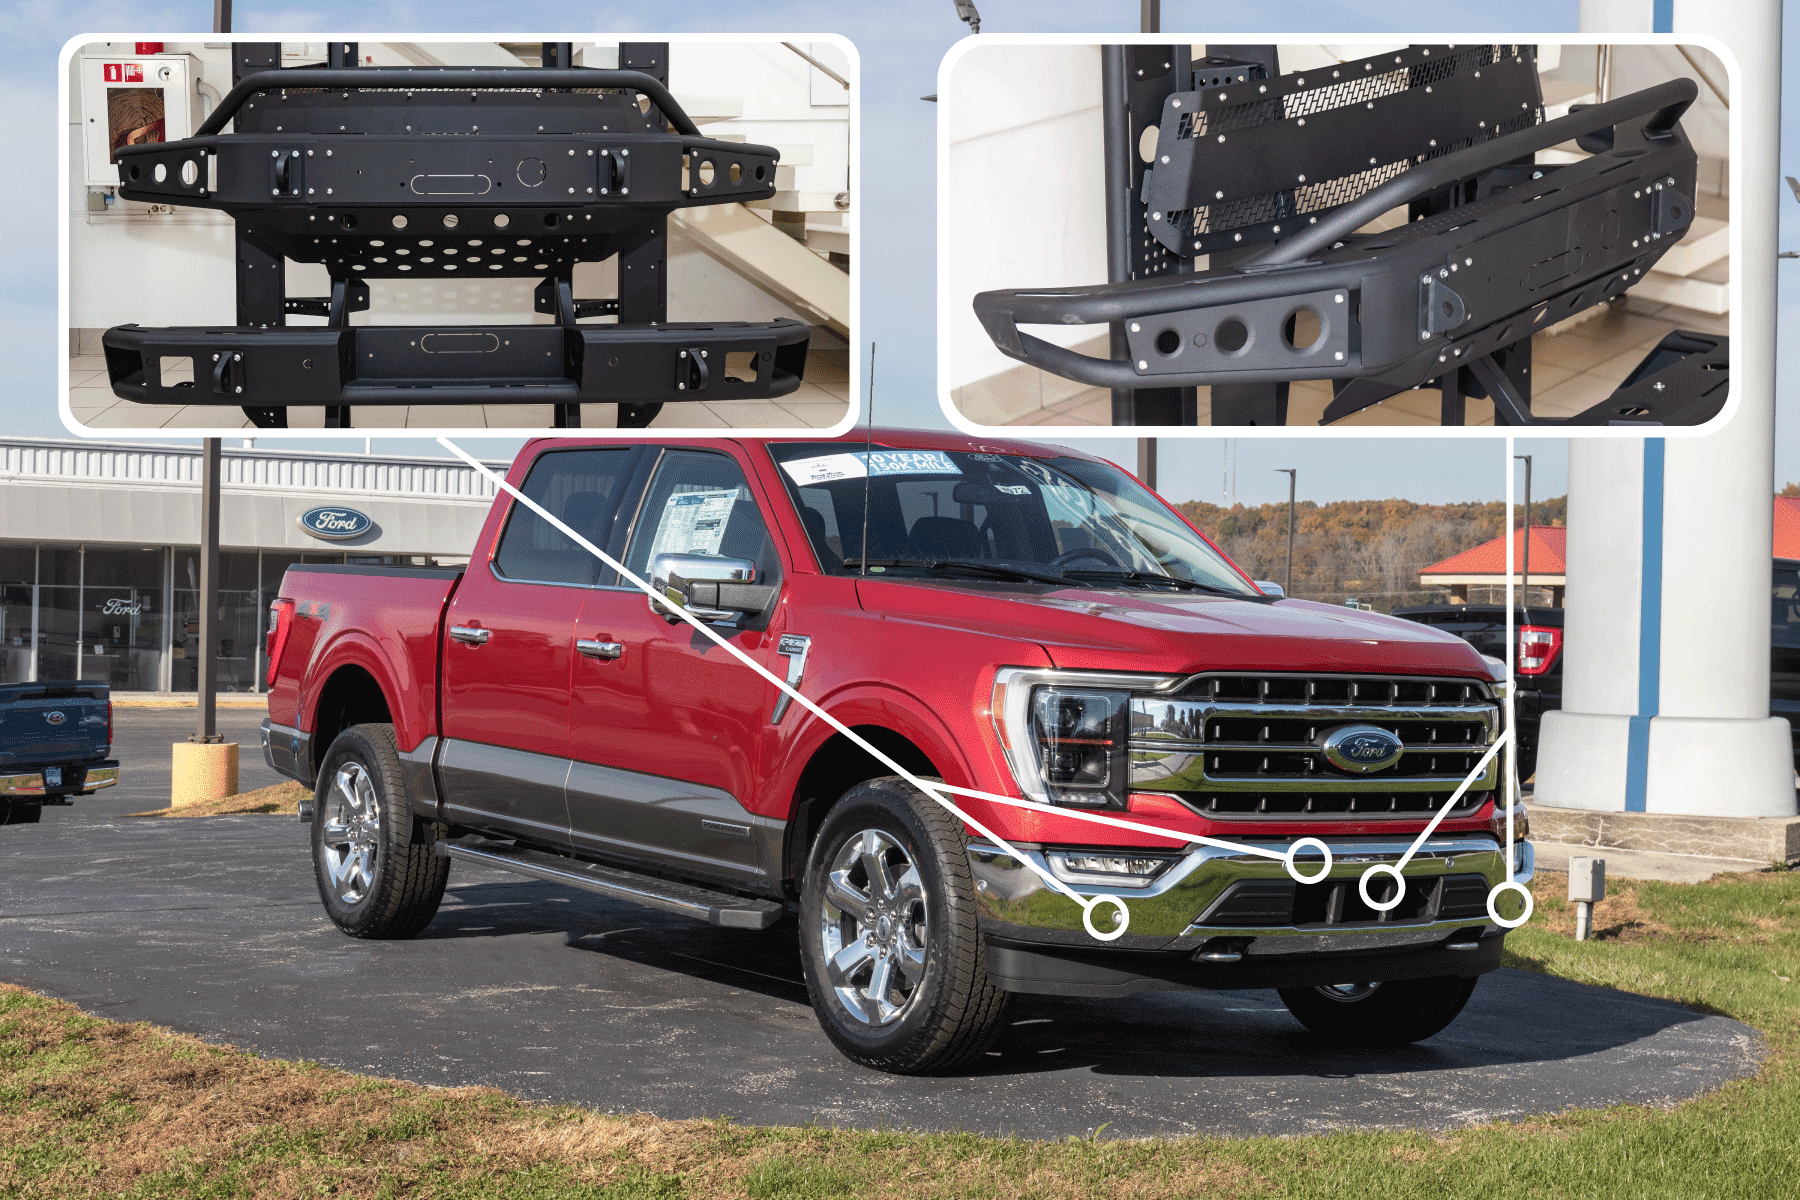 Collaged photo of installing bull bars to a truck